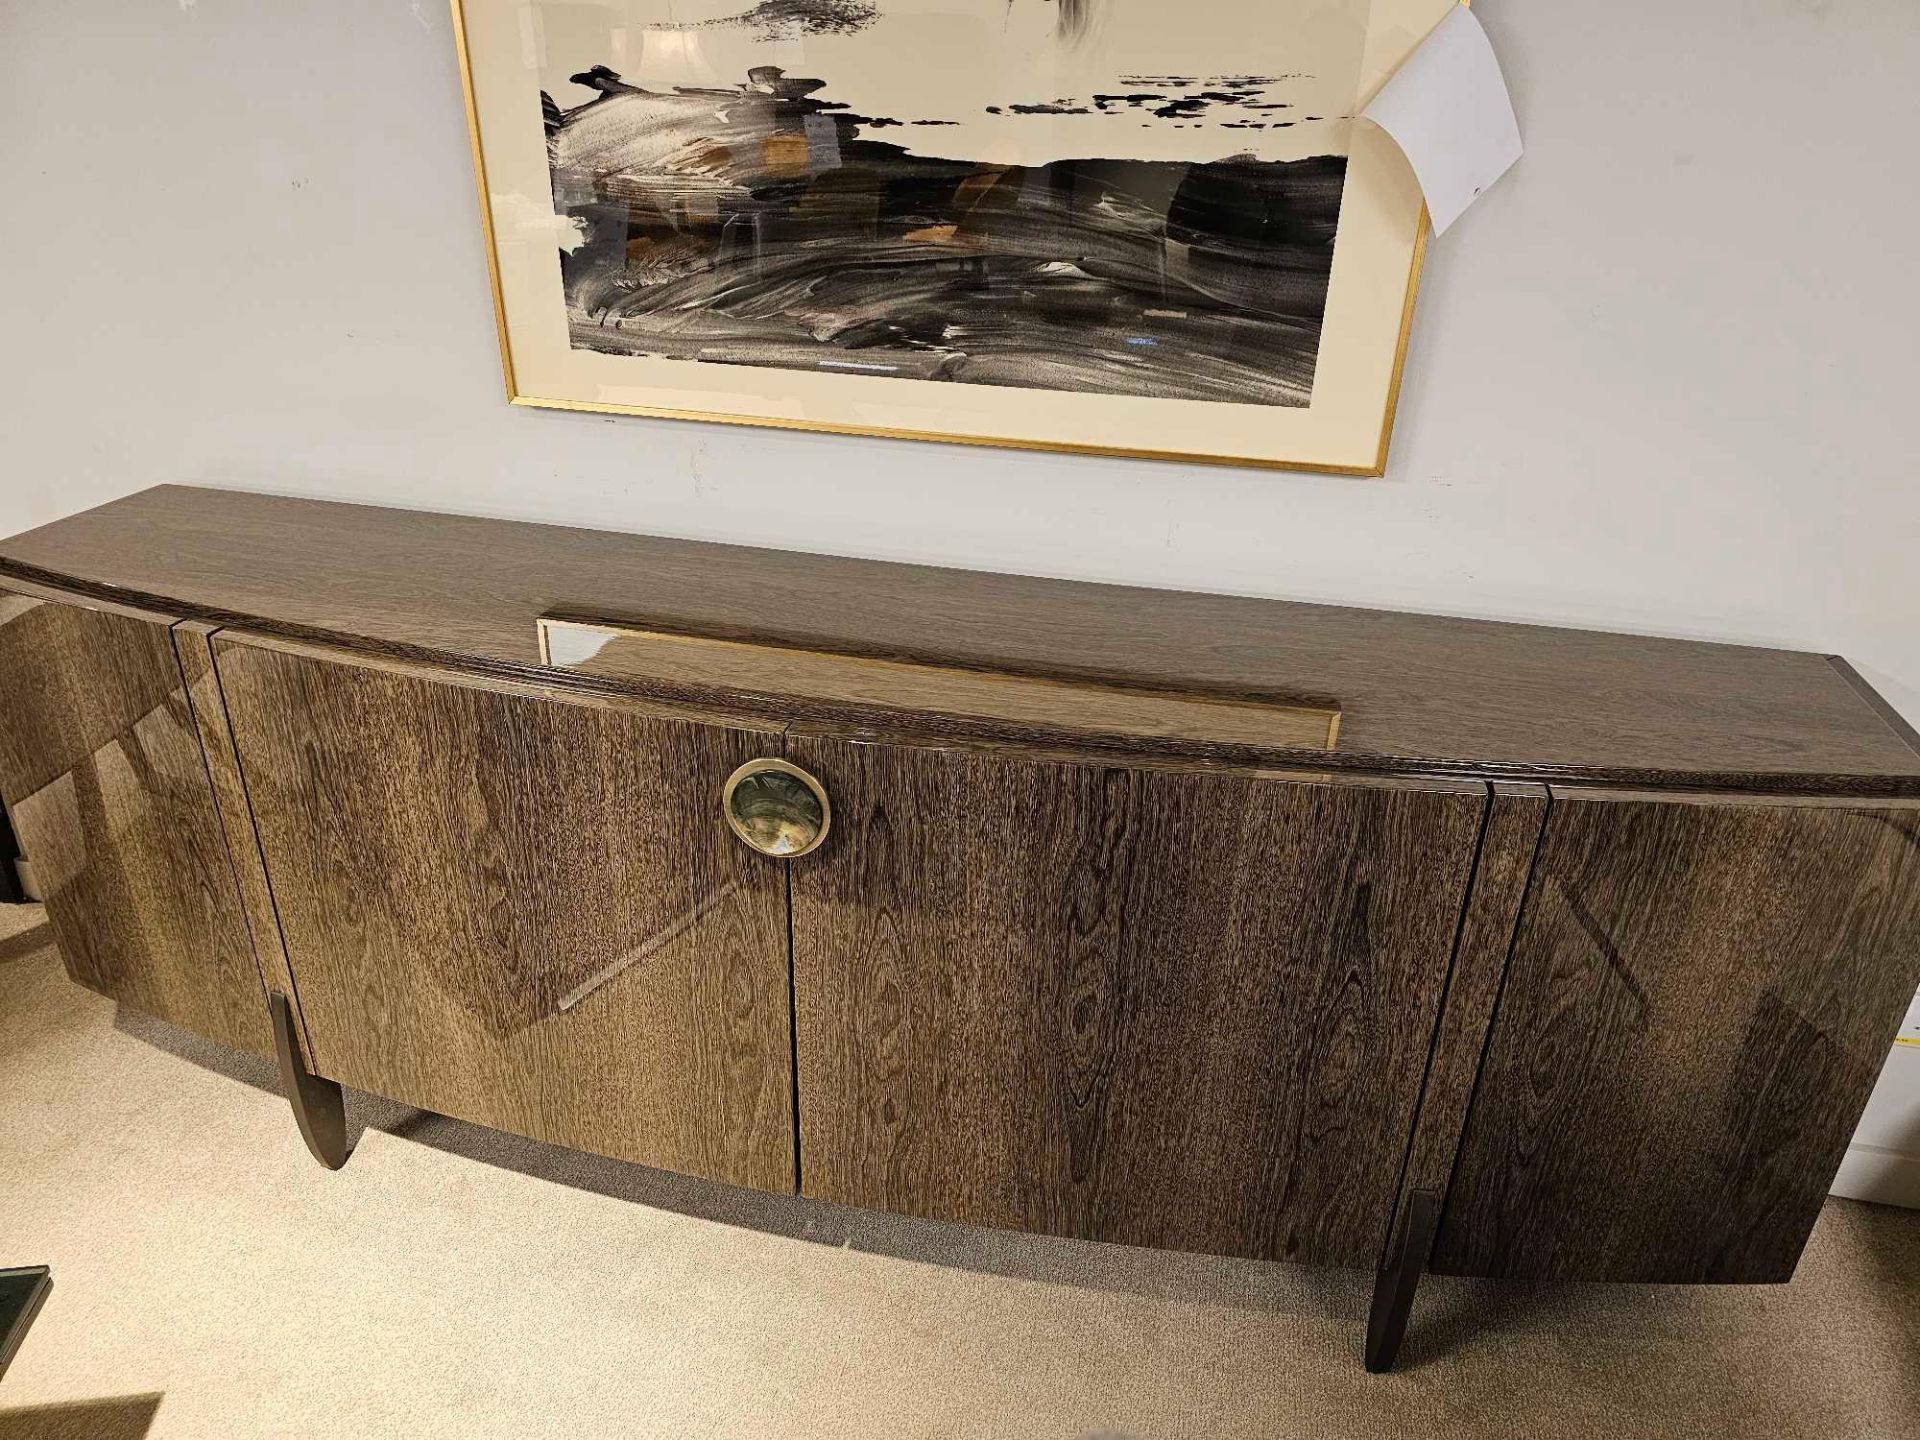 Fashion Affair Large Sideboard by Telemaco for Malerba The Buffet, for the living room, is shaped by - Image 16 of 25